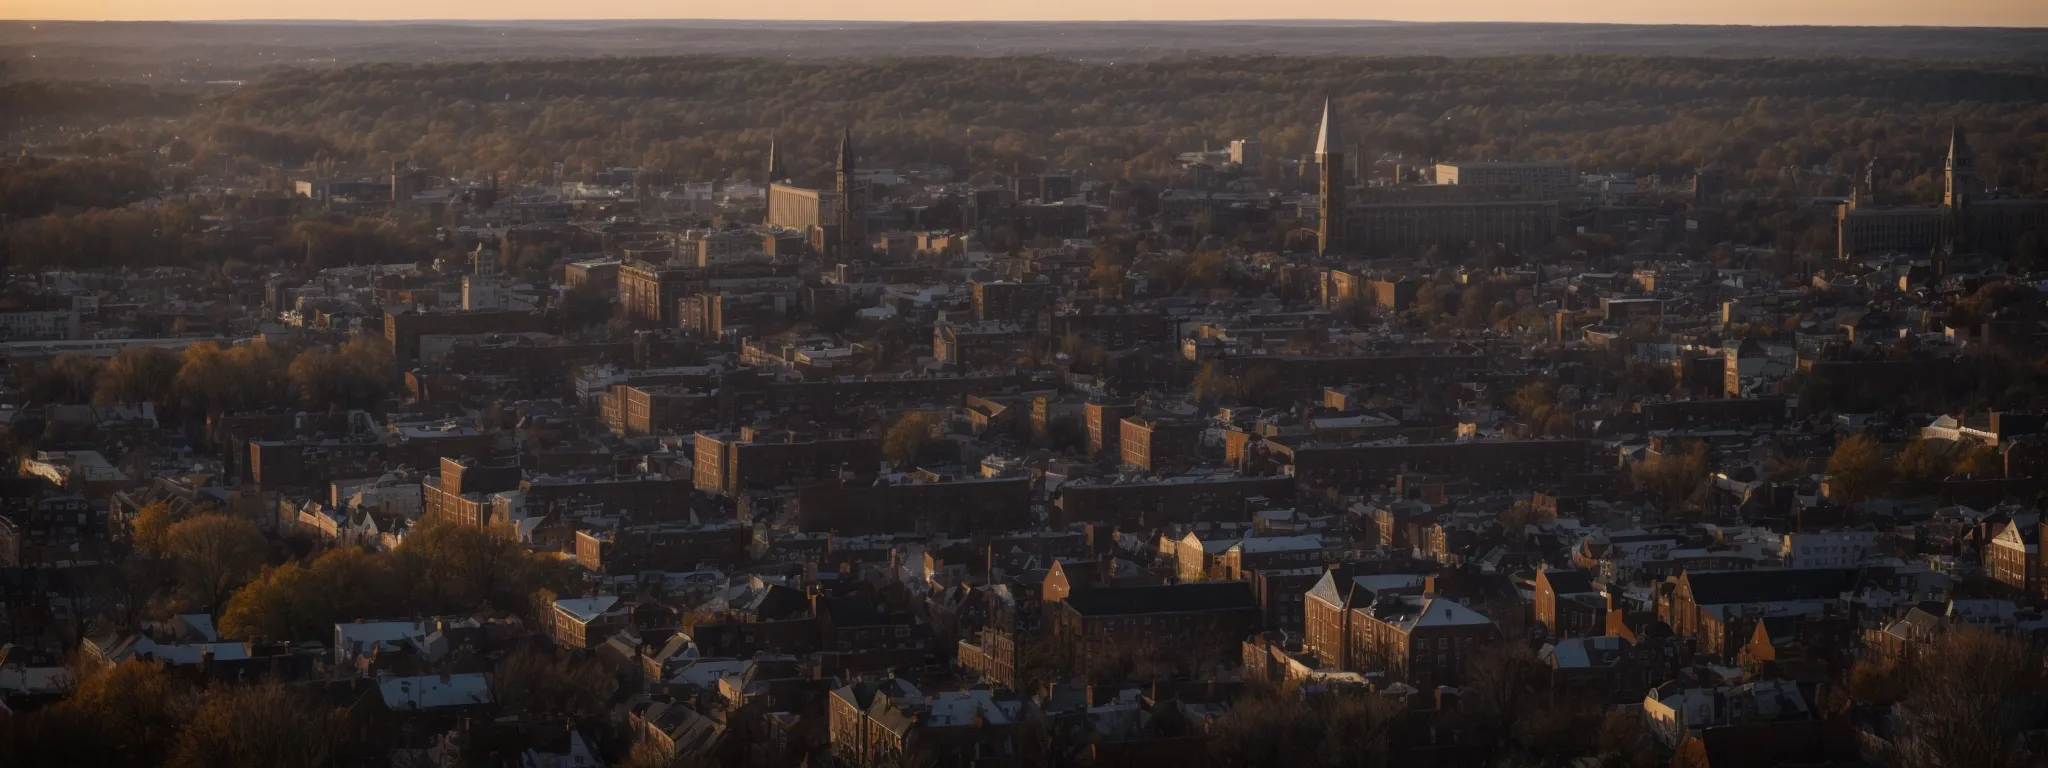 a wide shot of the historic york, pennsylvania skyline under the glow of a setting sun, symbolizing the potential growth in digital visibility.